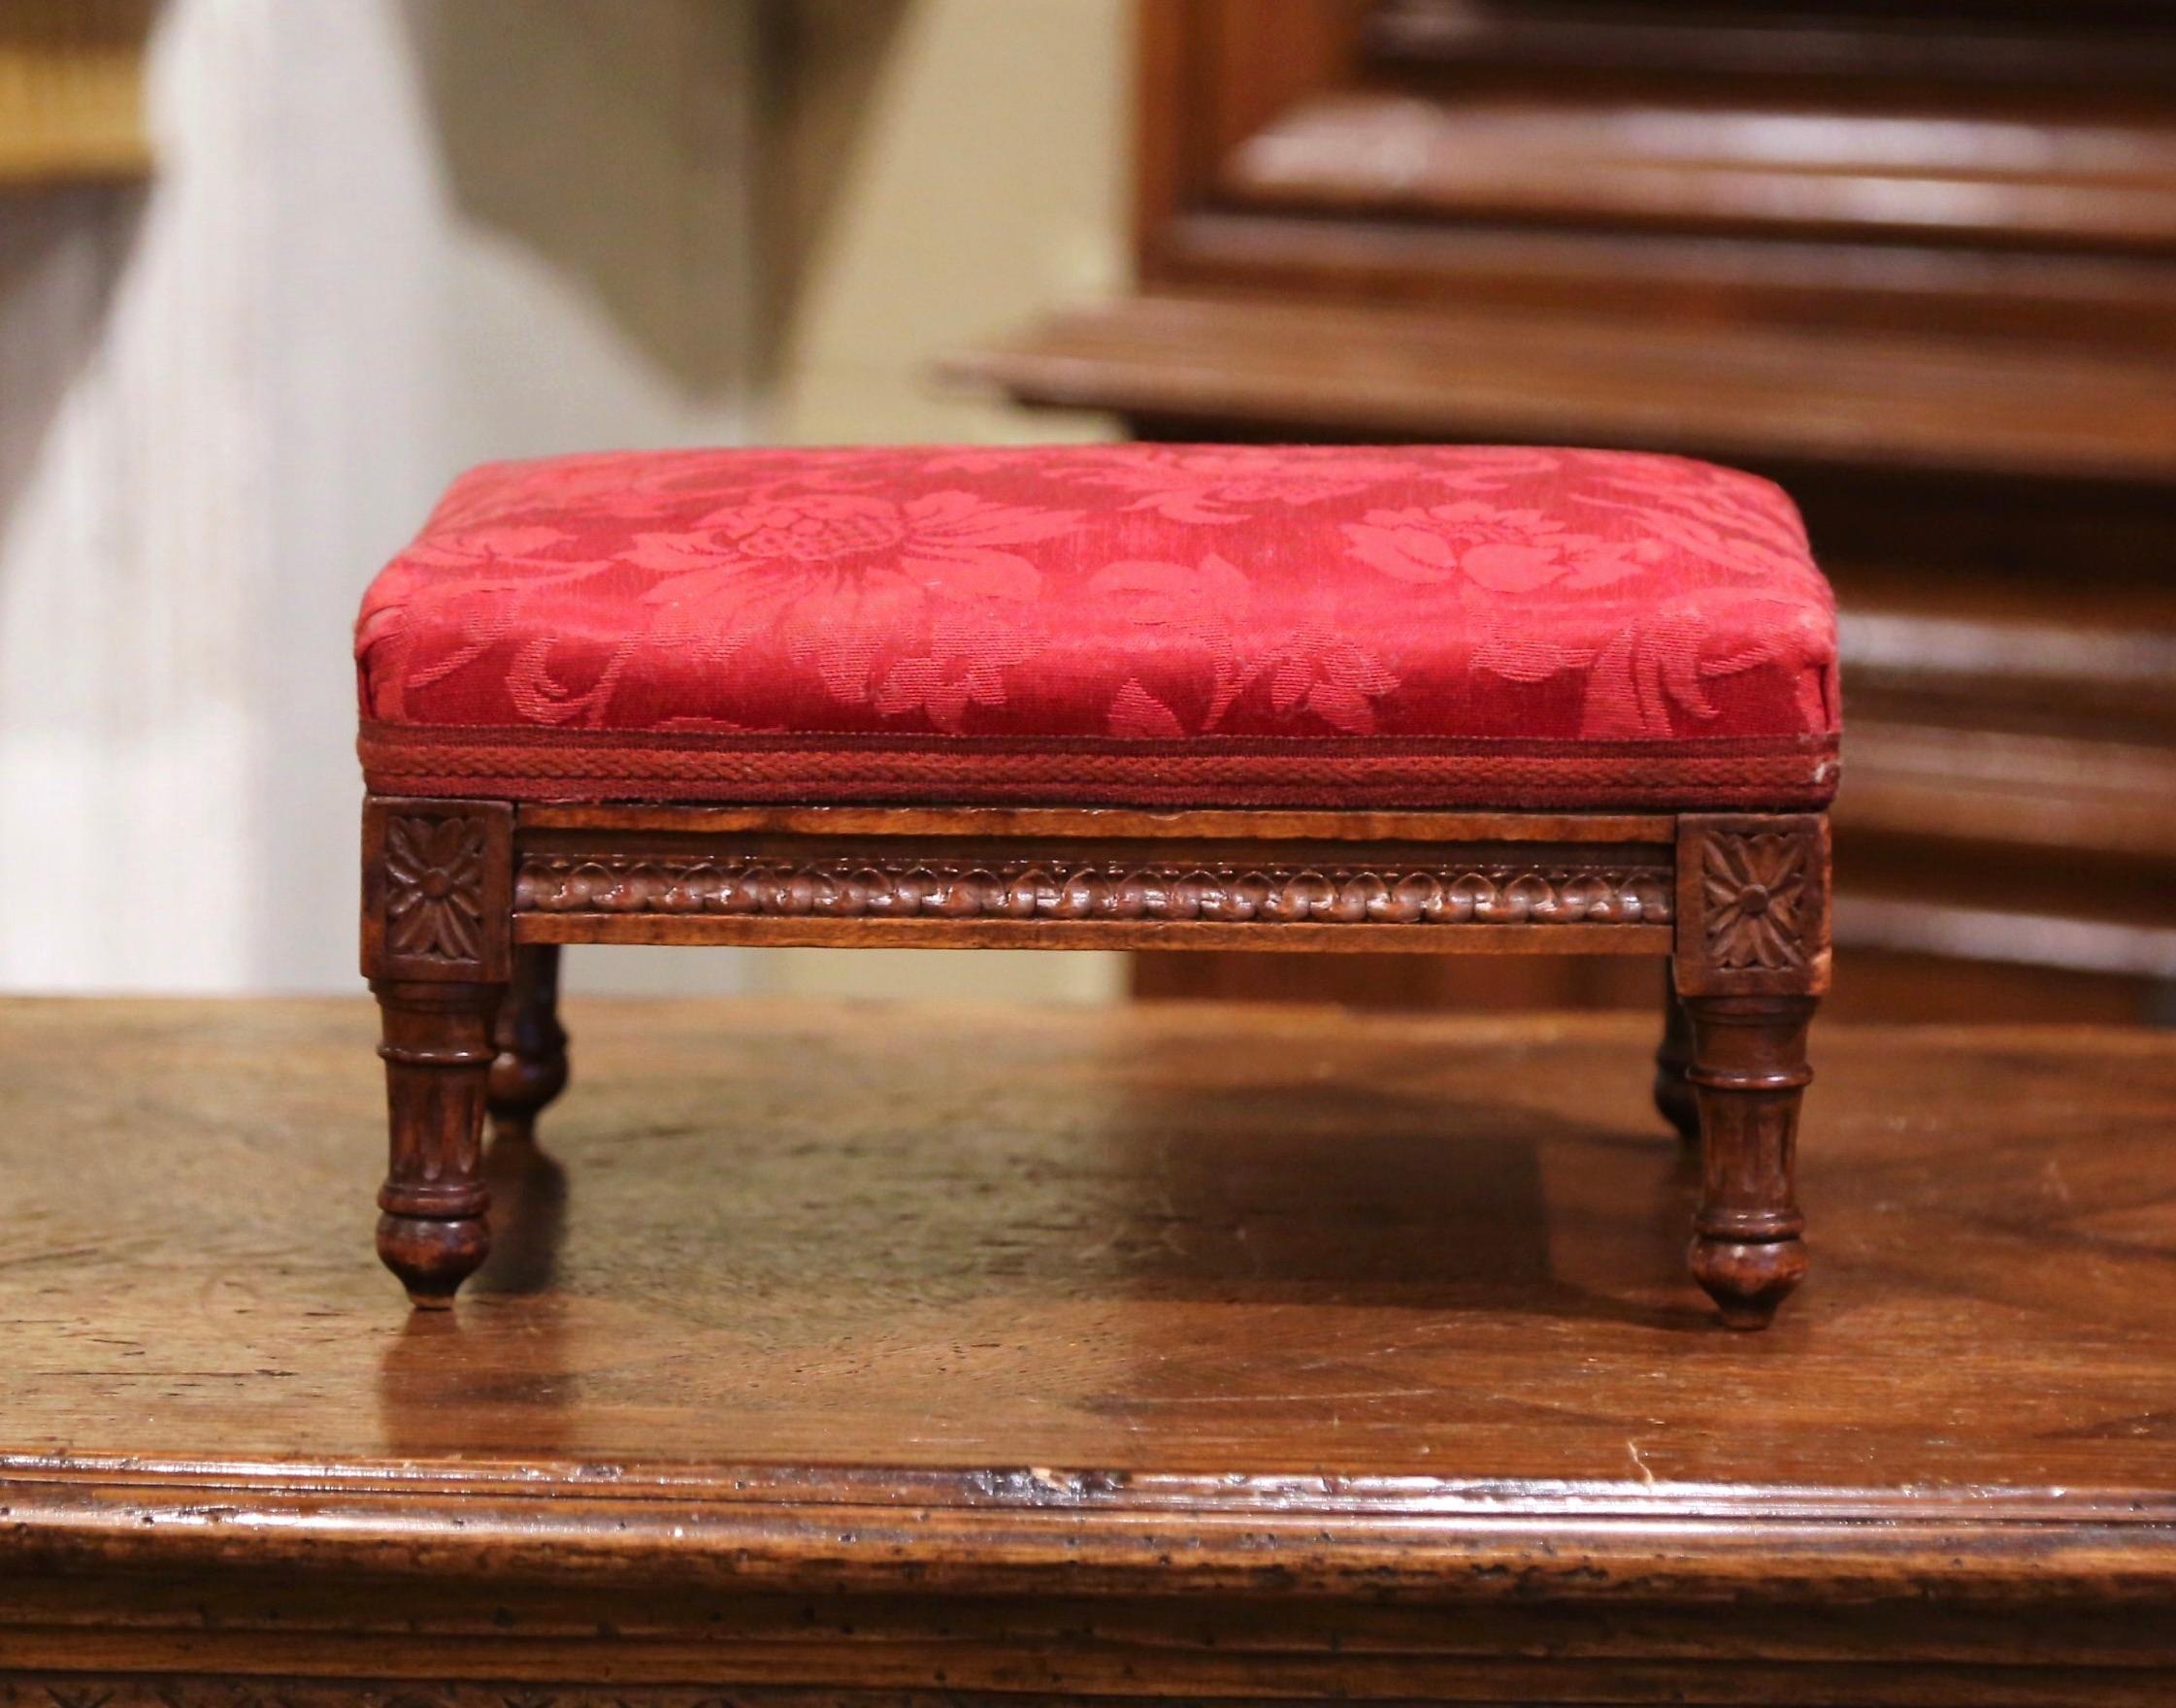 Put your feet up with style and comfort with this elegant Louis XVI foot stool. Crafted in France circa 1920 and rectangular in shape, the antique stool stands on tapered legs over a carved apron decorated with rosette medallions in each corner. The